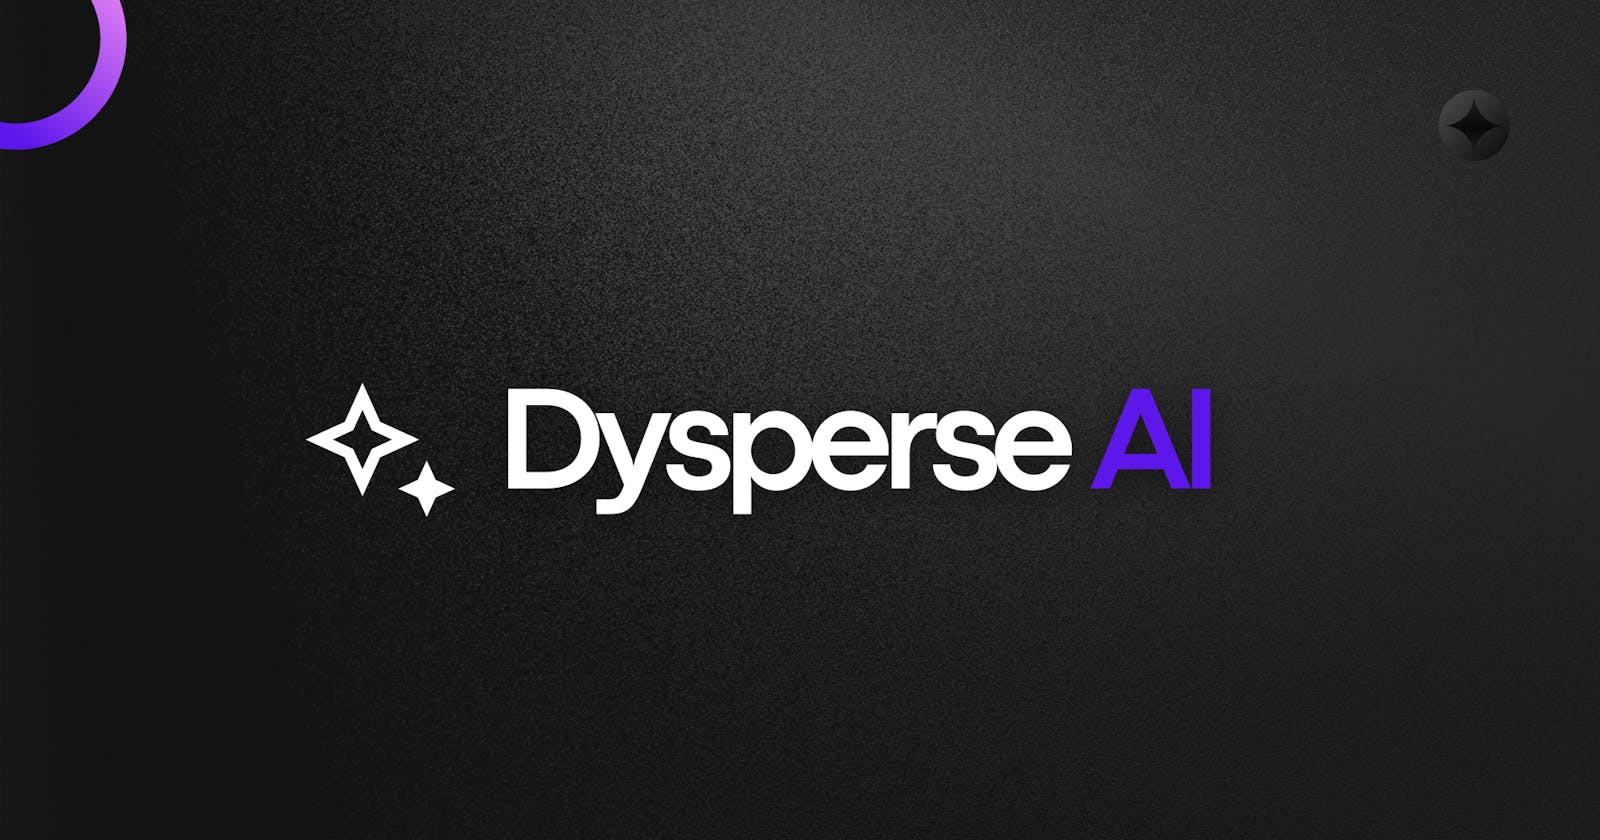 Introducing Dysperse AI